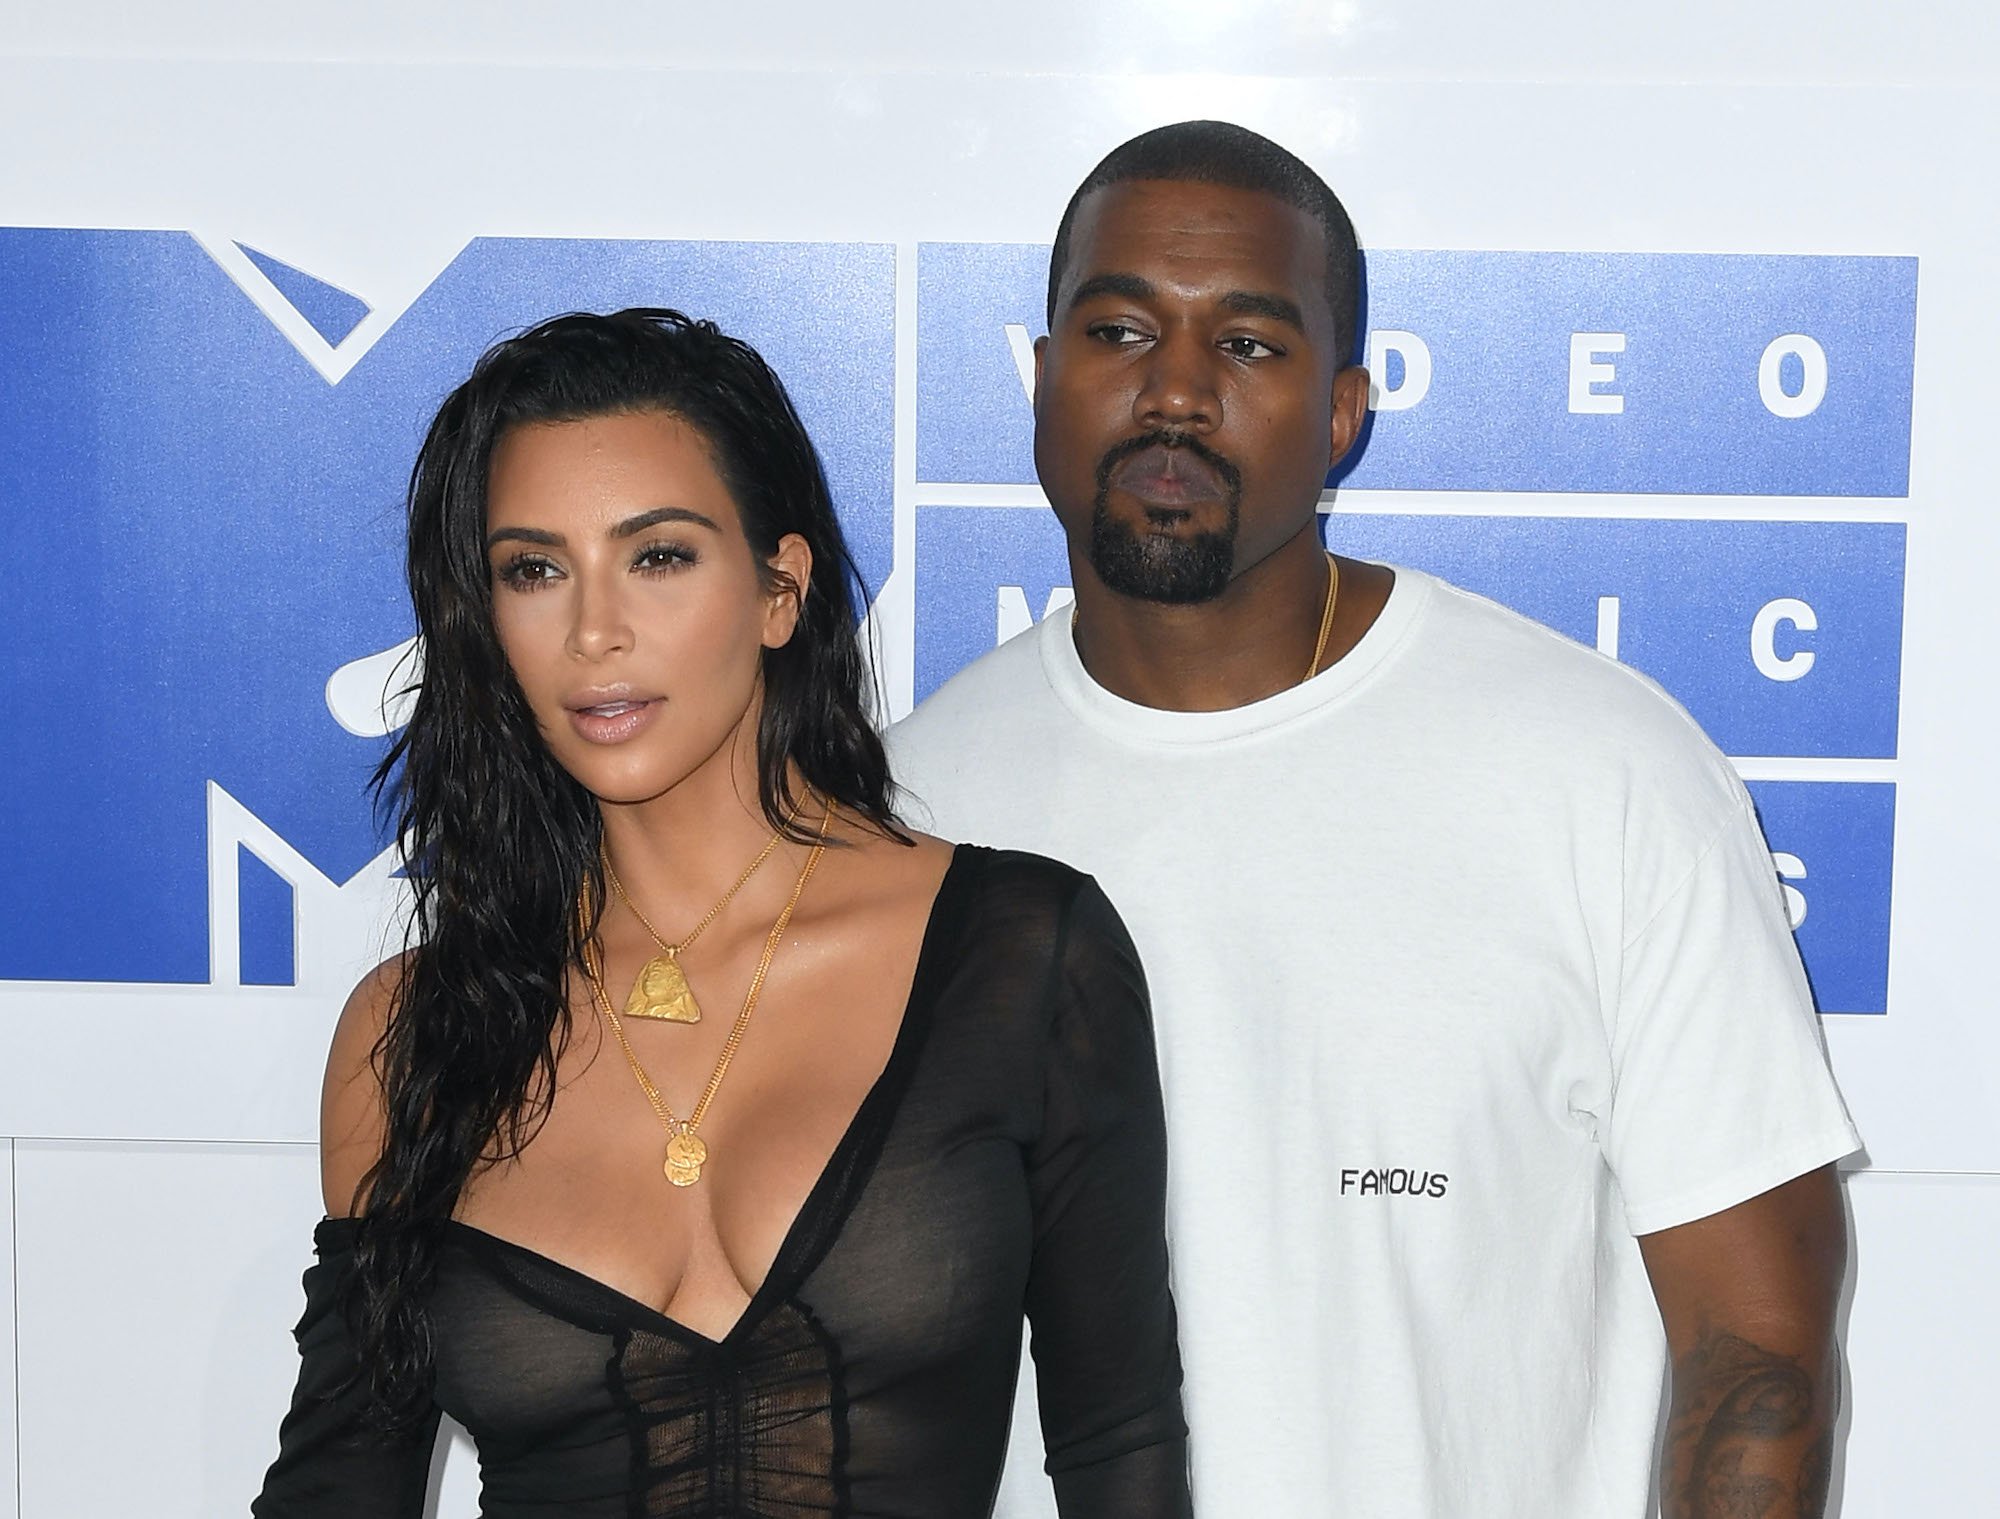 (L-R) Kim Kardashian and Kanye West in front of a white background